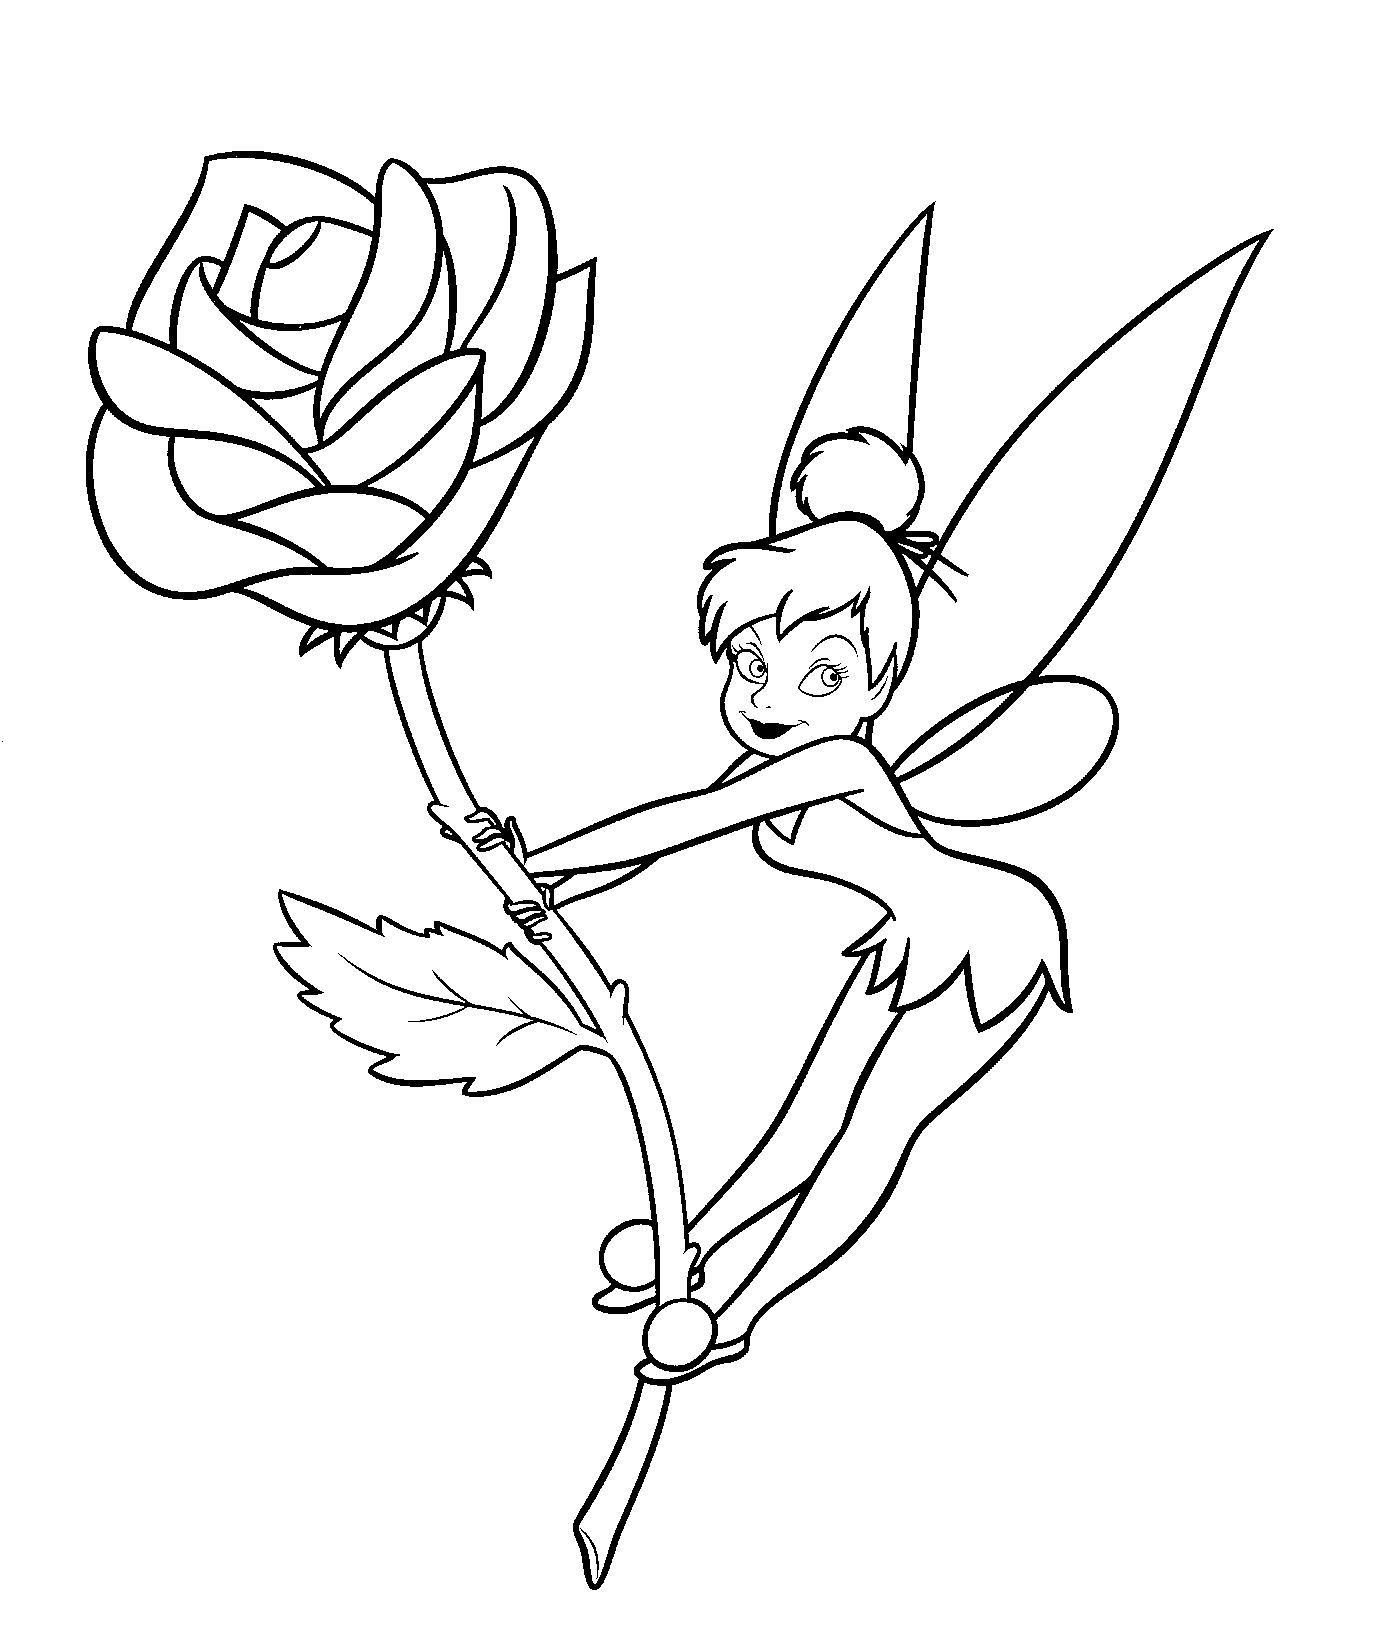 Malvorlagen Tinkerbell
 Tinkerbell Coloring Pages